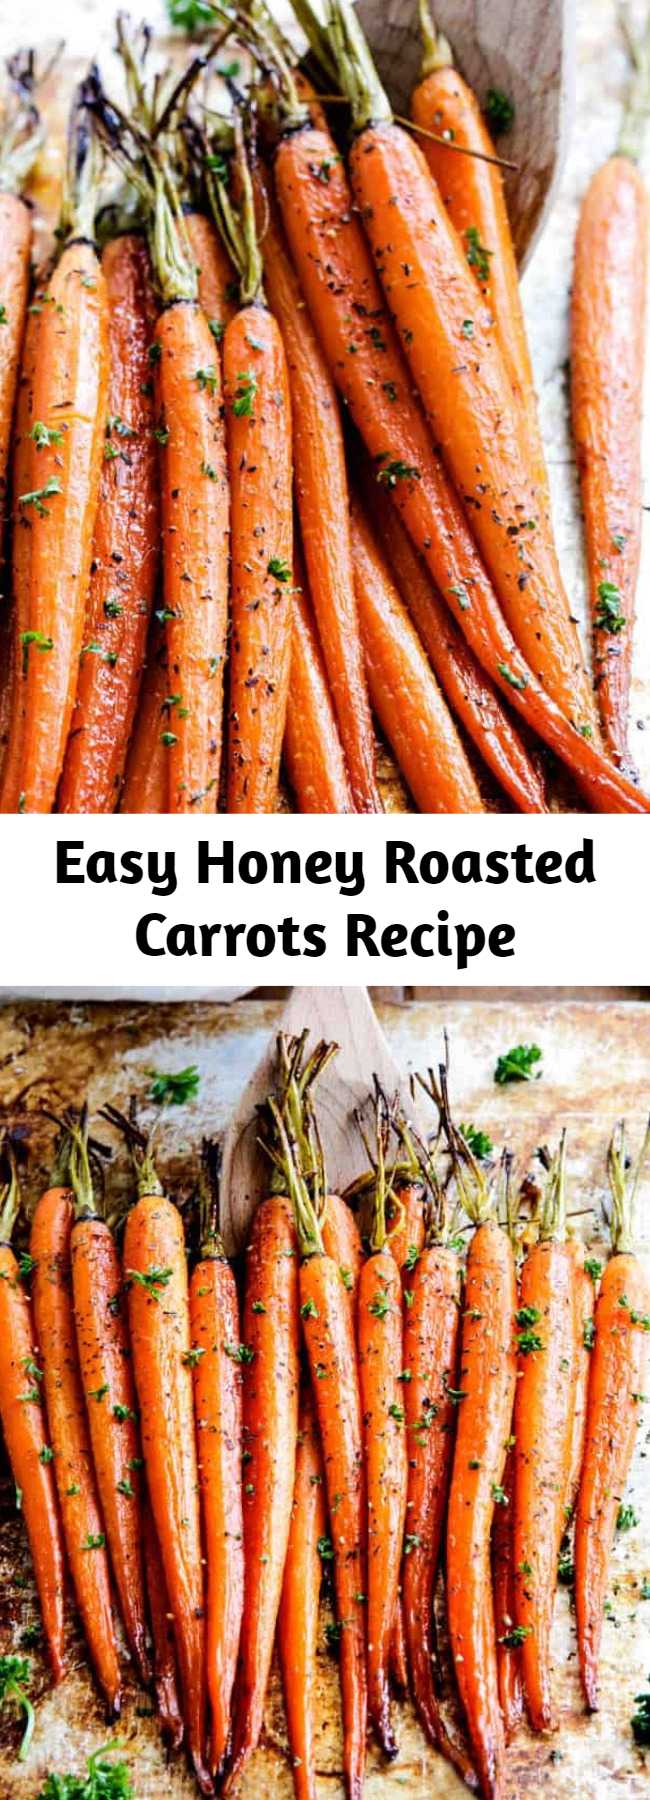 Easy Honey Roasted Carrots Recipe - Roasted Carrots infused with honey and garlic that are tender, sweet and savory and hands down the easiest side dish EVER with only 10 minutes prep! These Roasted Carrots are absolutely obsessive worthy. I am thoroughly convinced they are the most delicious oven roasted carrots ever. They are the ideal holiday (Thanksgiving, Easter) side that everyone will devour like candy!